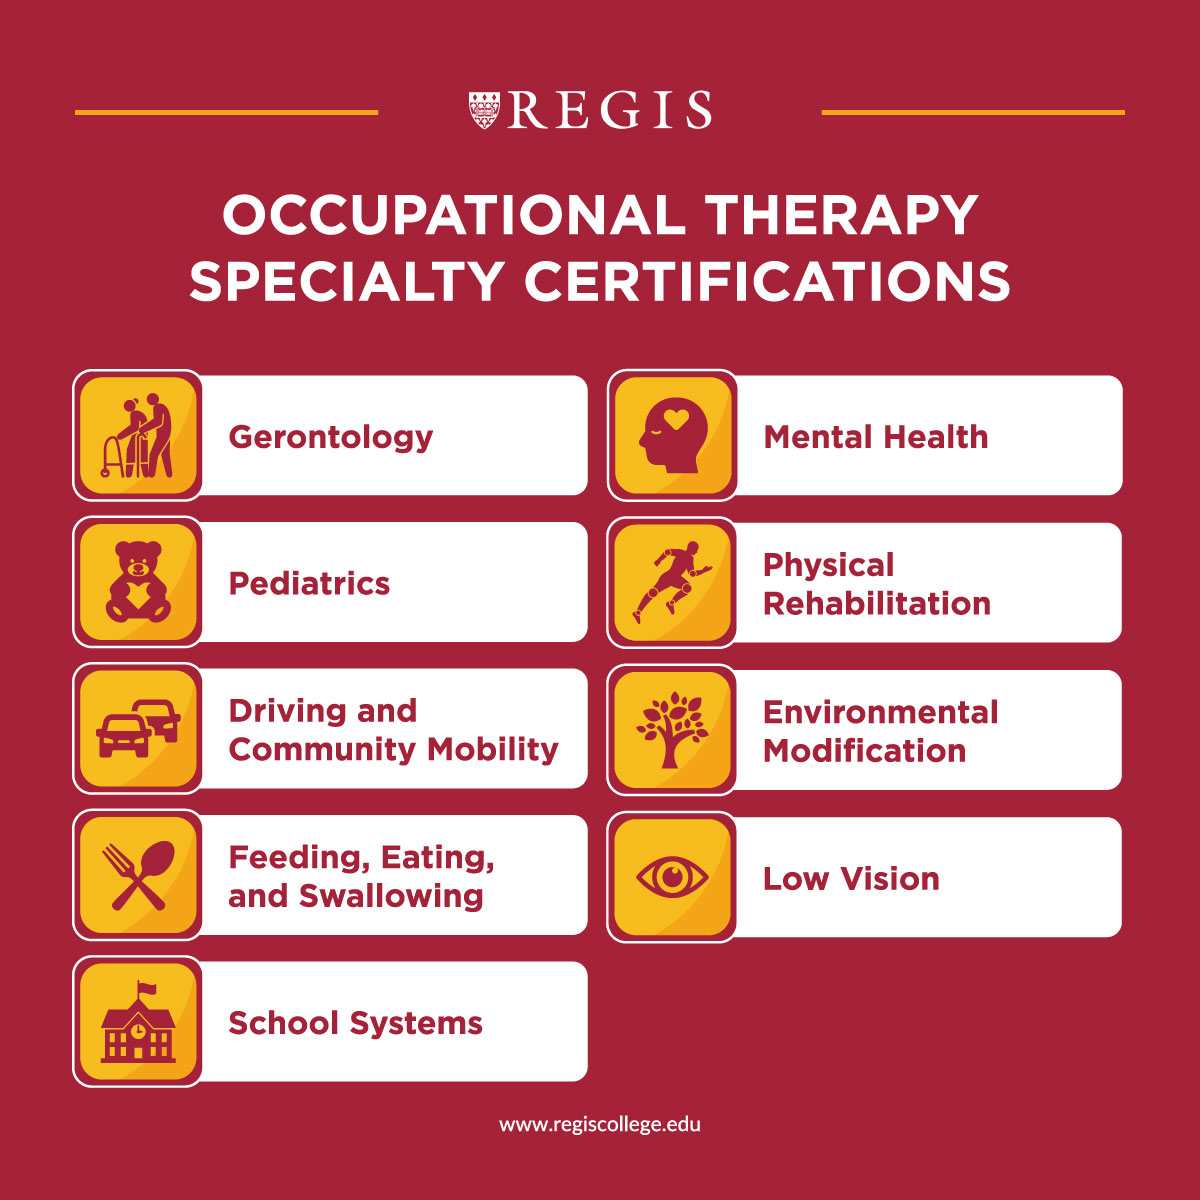 Occupational Therapy Specialty Certifications